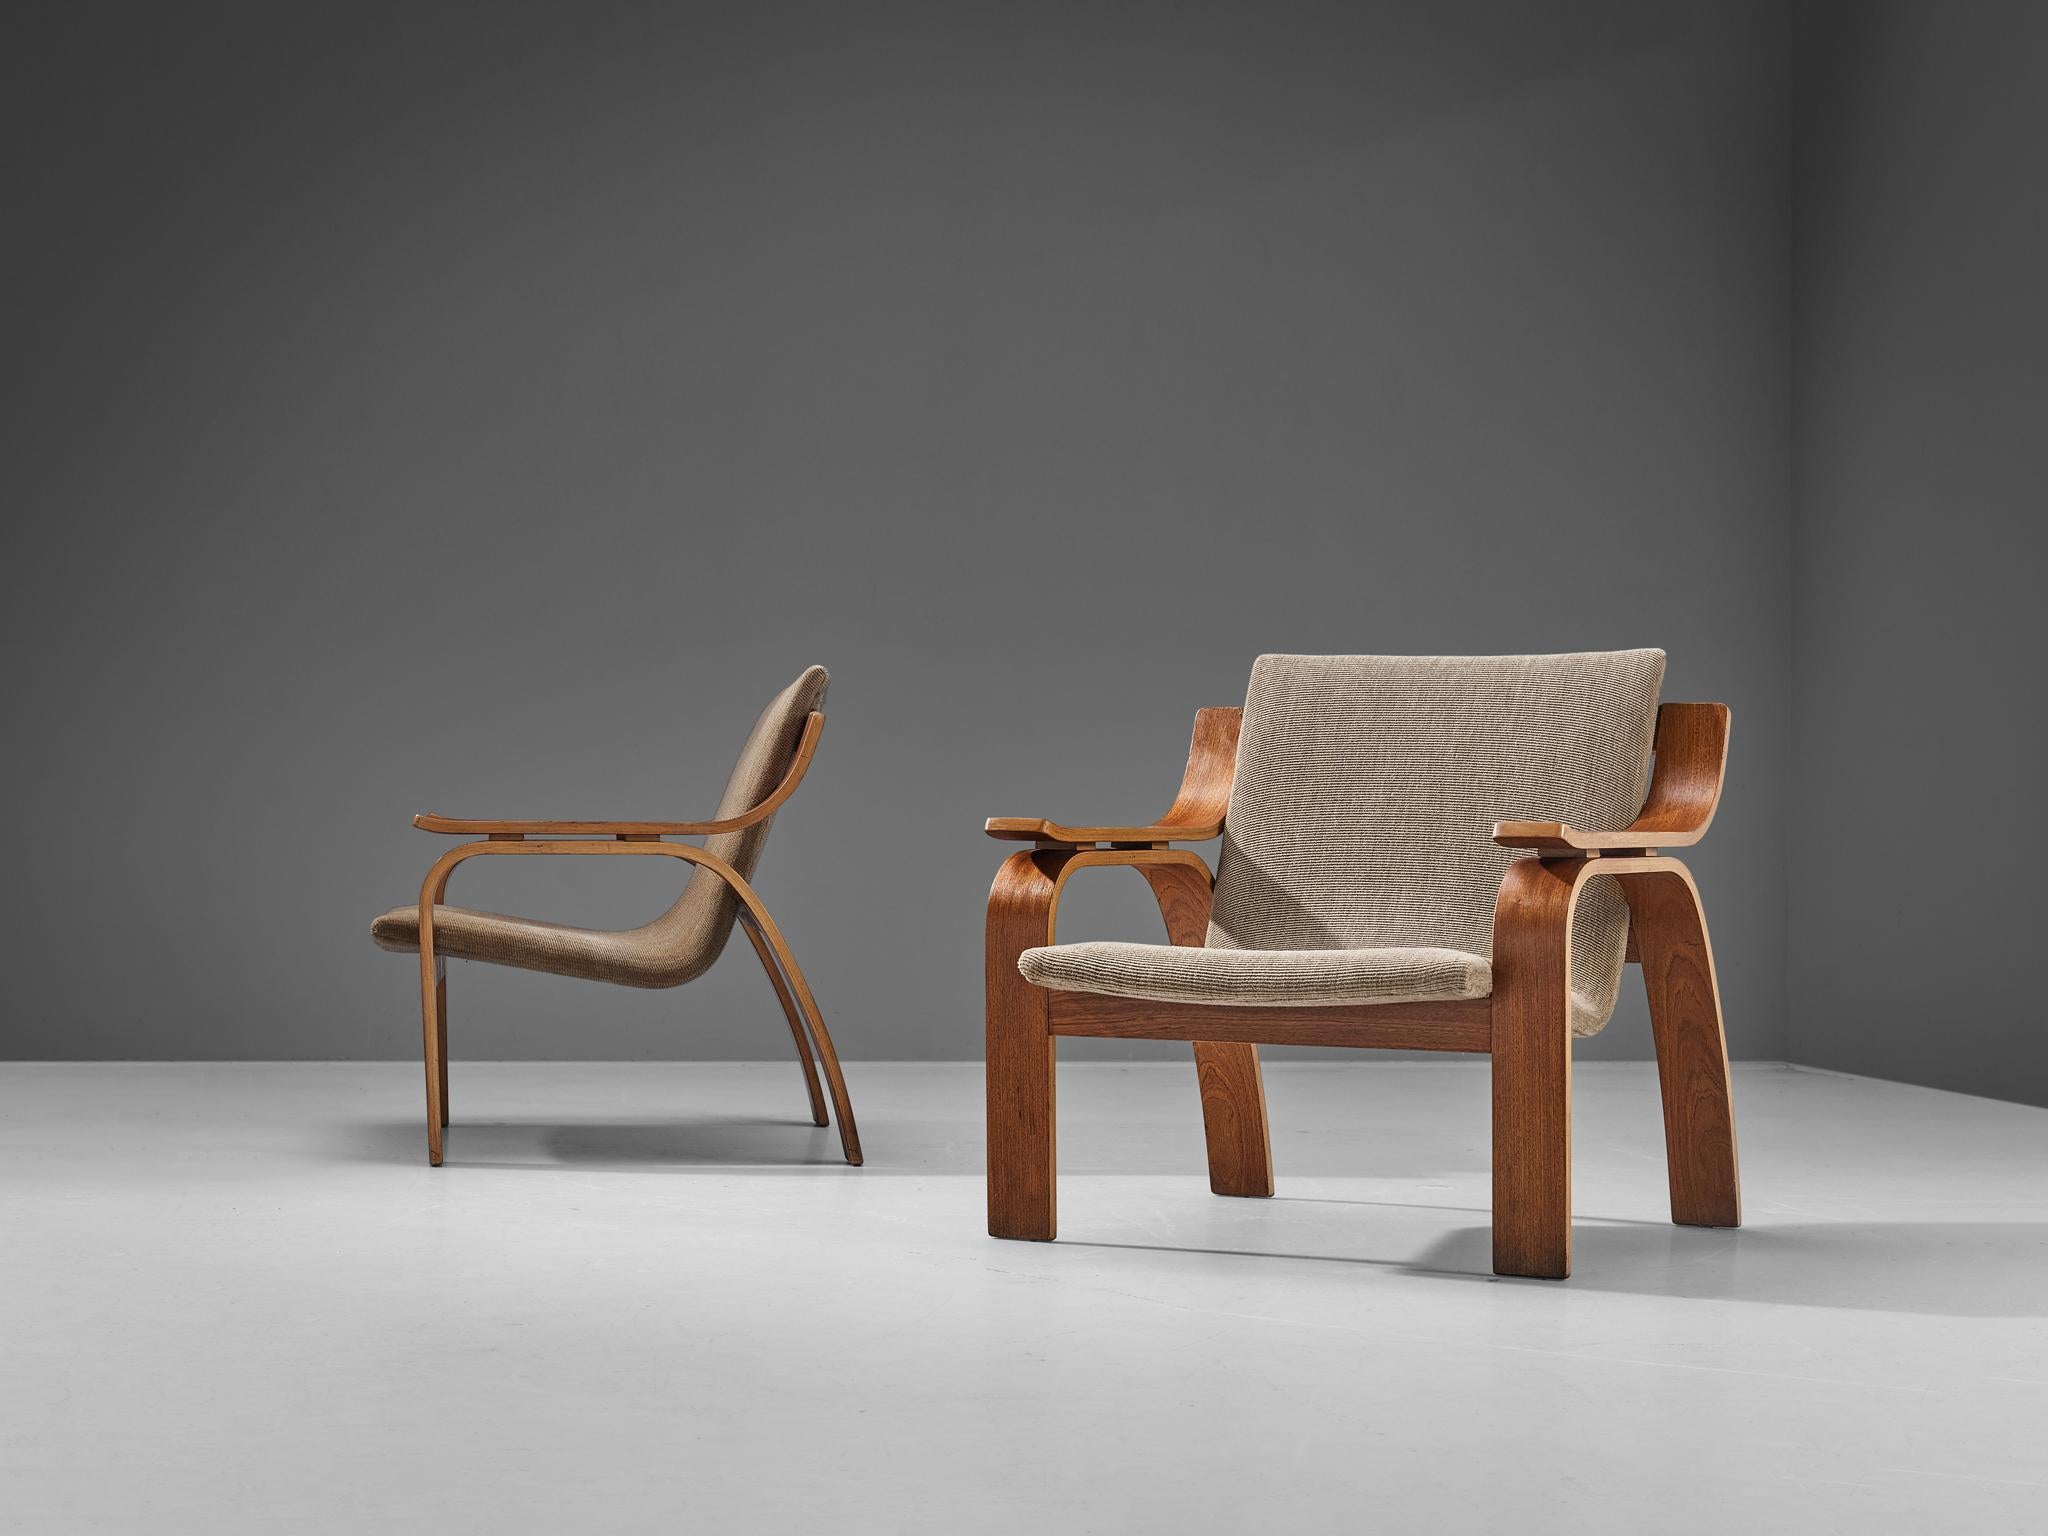 Pair of lounge chairs, bentwood mahogany, fabric, Czech Republic, 1970s

This charming pair of lounge chairs shows a splendid construction that epitomizes a simplistic, natural, and timeless aesthetics. The frame of the chair is well-designed